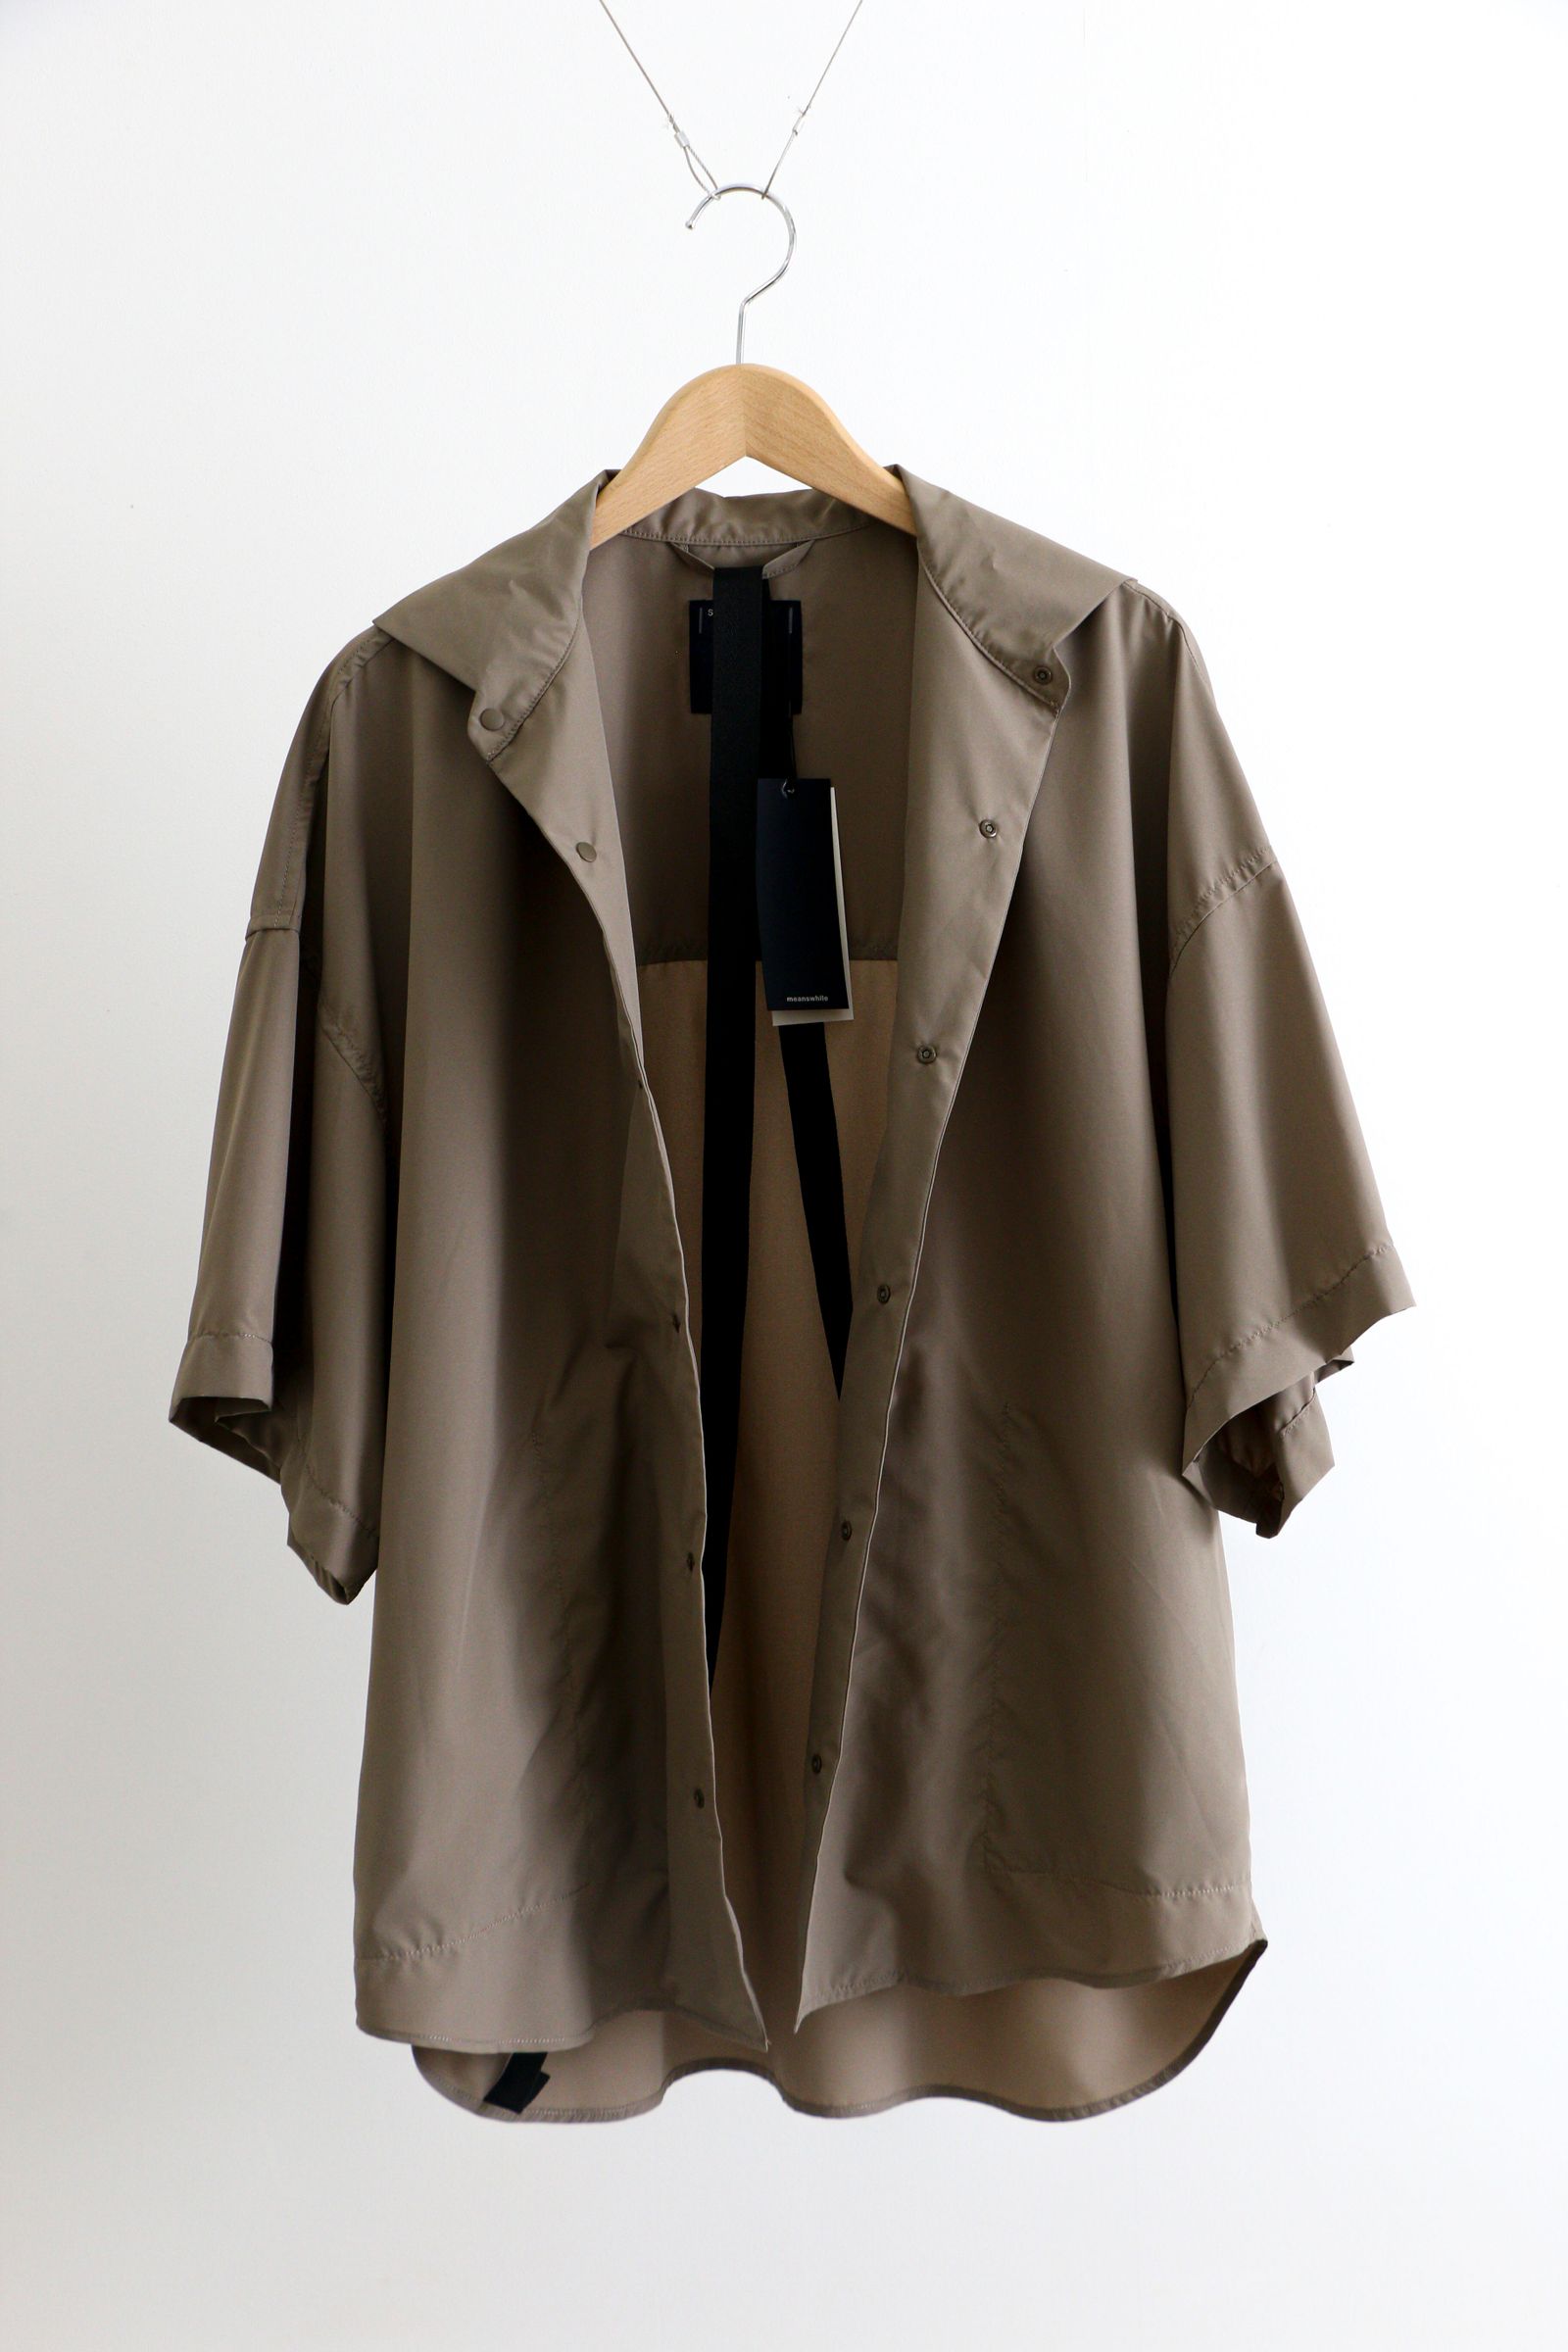 meanswhile - FEATHER SMOOTH SNAP SH TAUPE / 2Wayシャツ / ベージュ